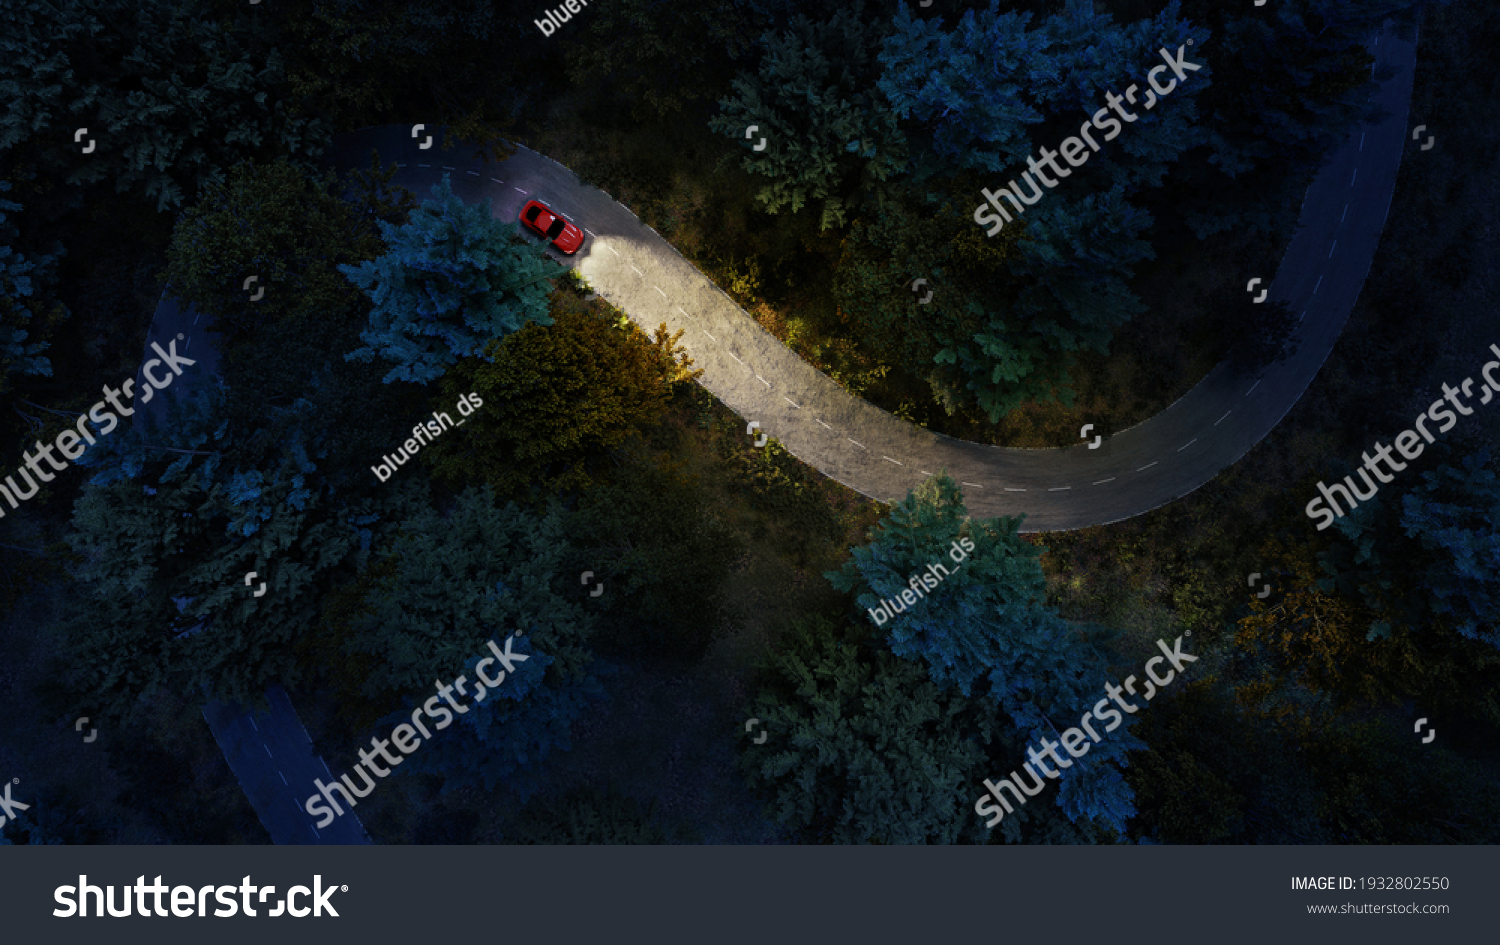 Adventure night road trip in the forest, aerial view of a car headlights on deep jungle road. On The Road Again concept. #1932802550